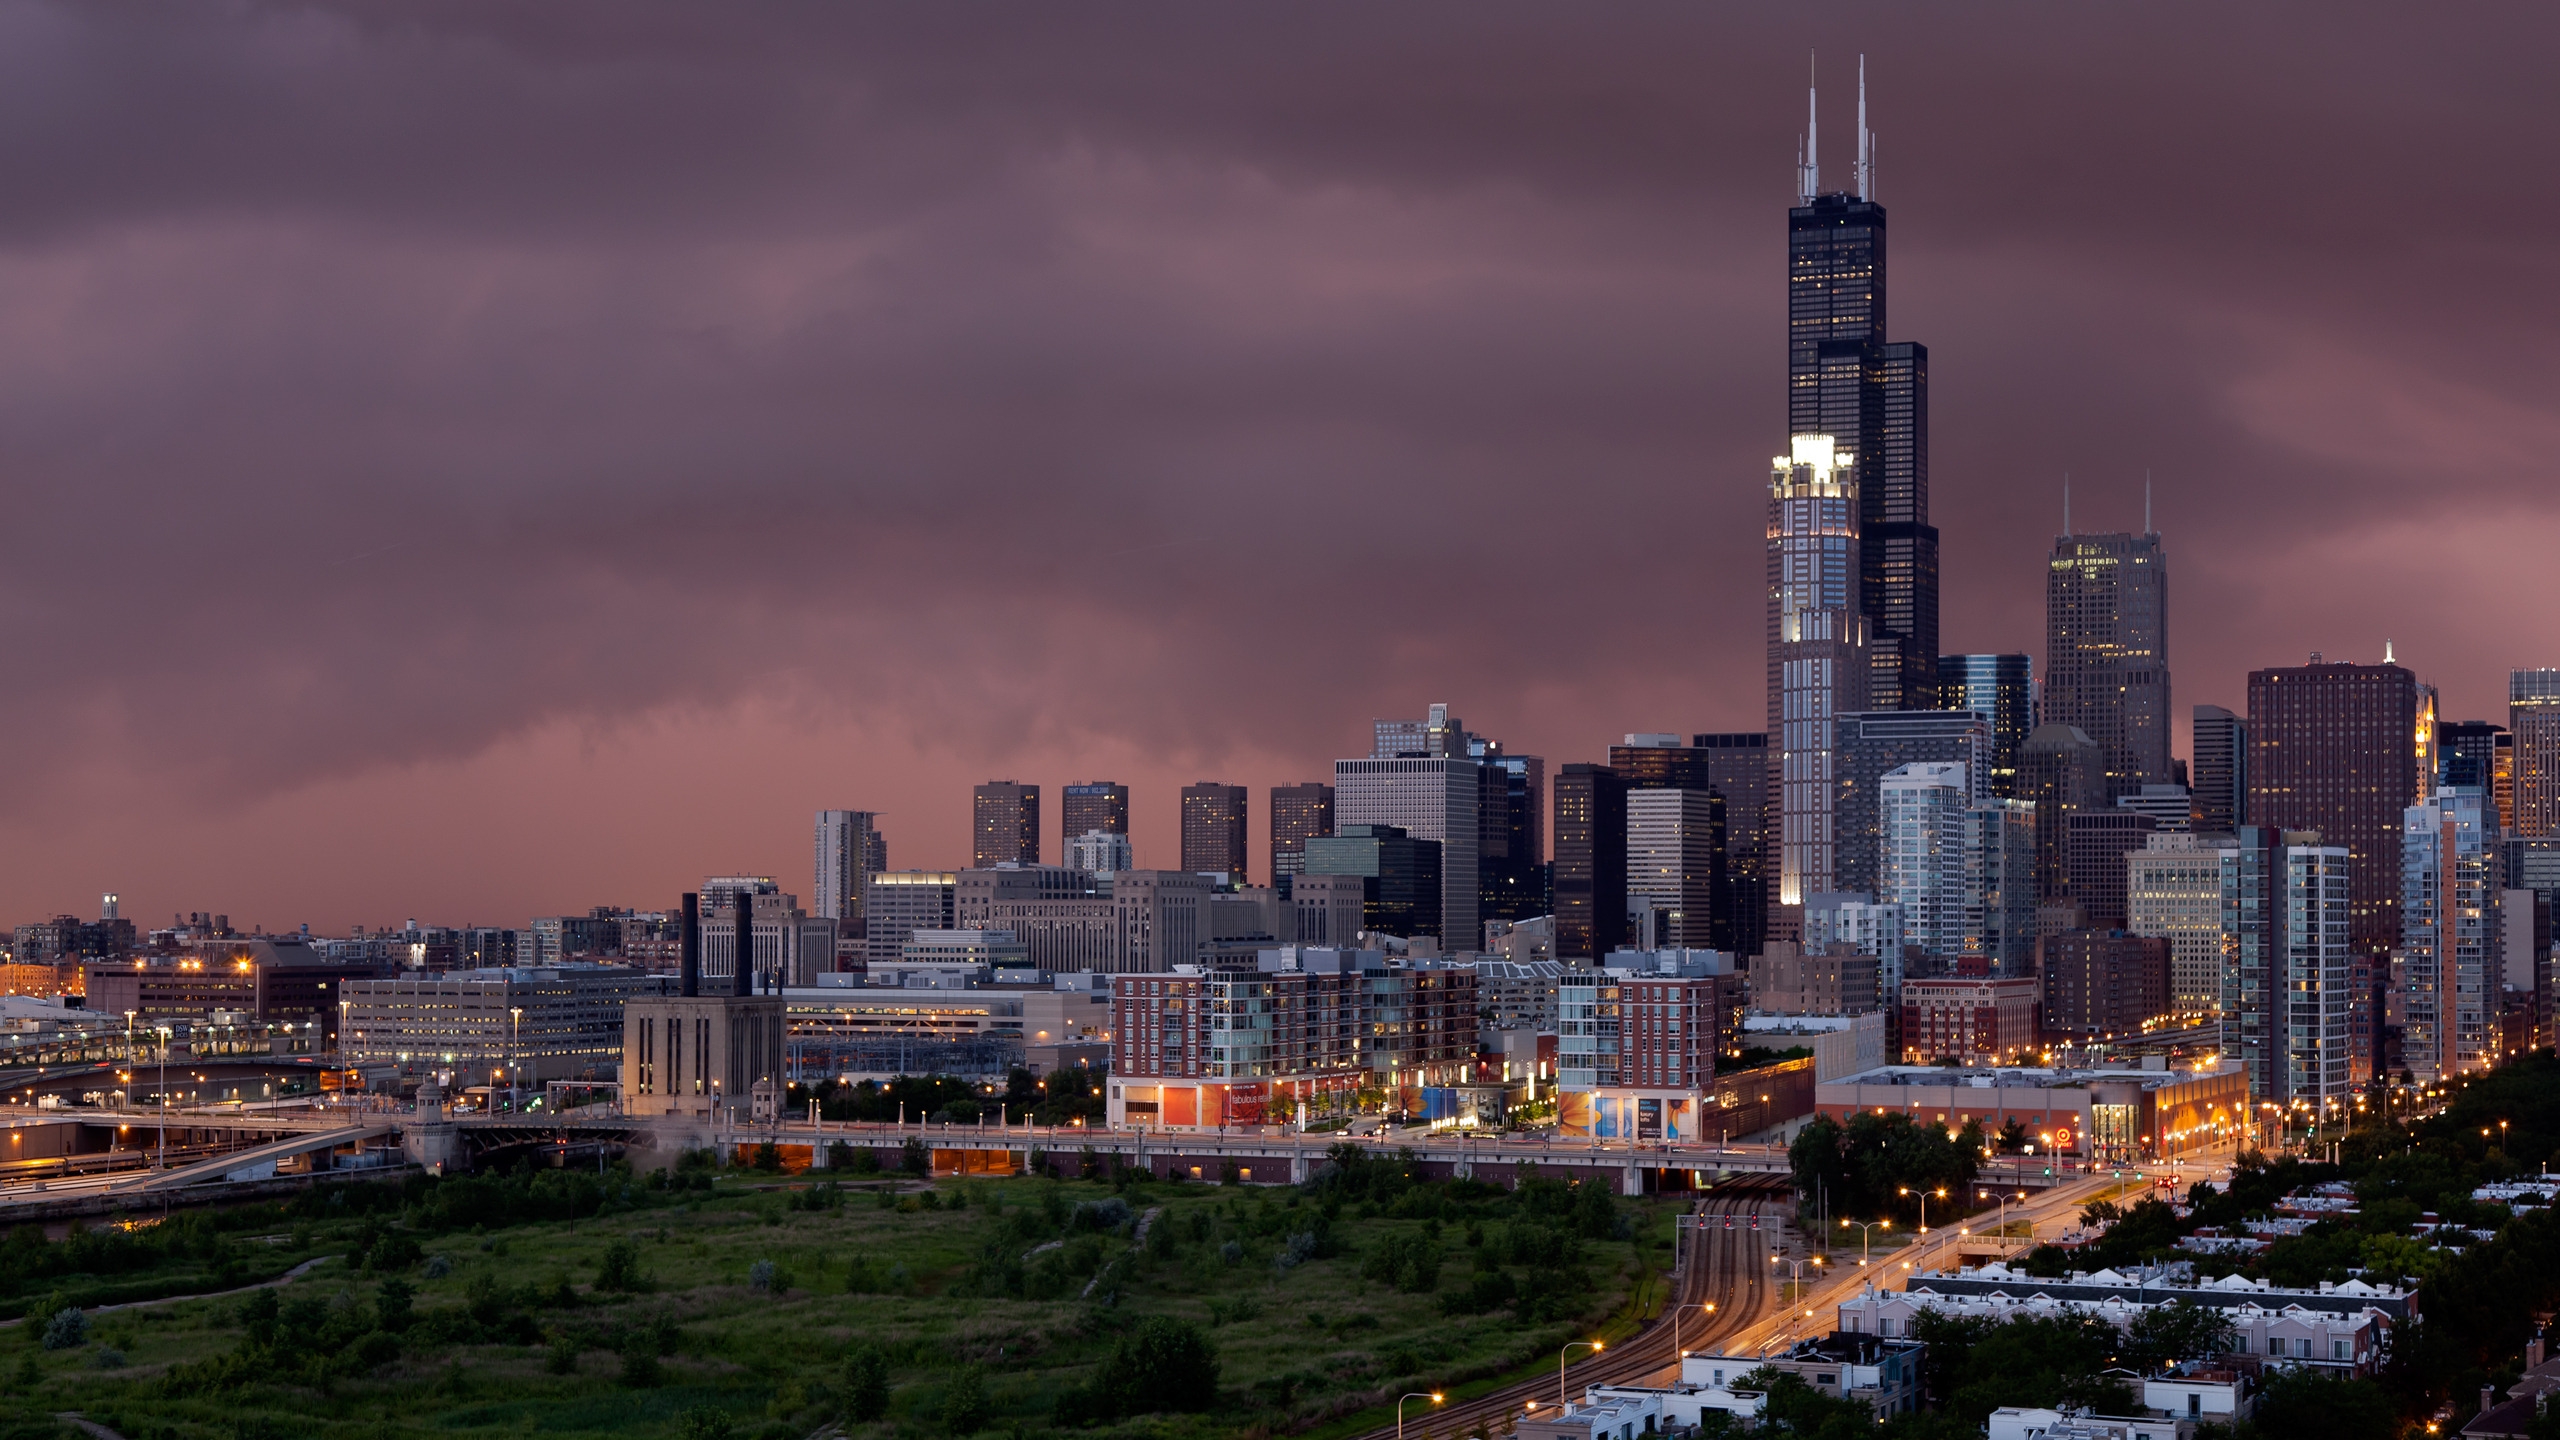 Sunset and Storm in Chicago for 2560x1440 HDTV resolution